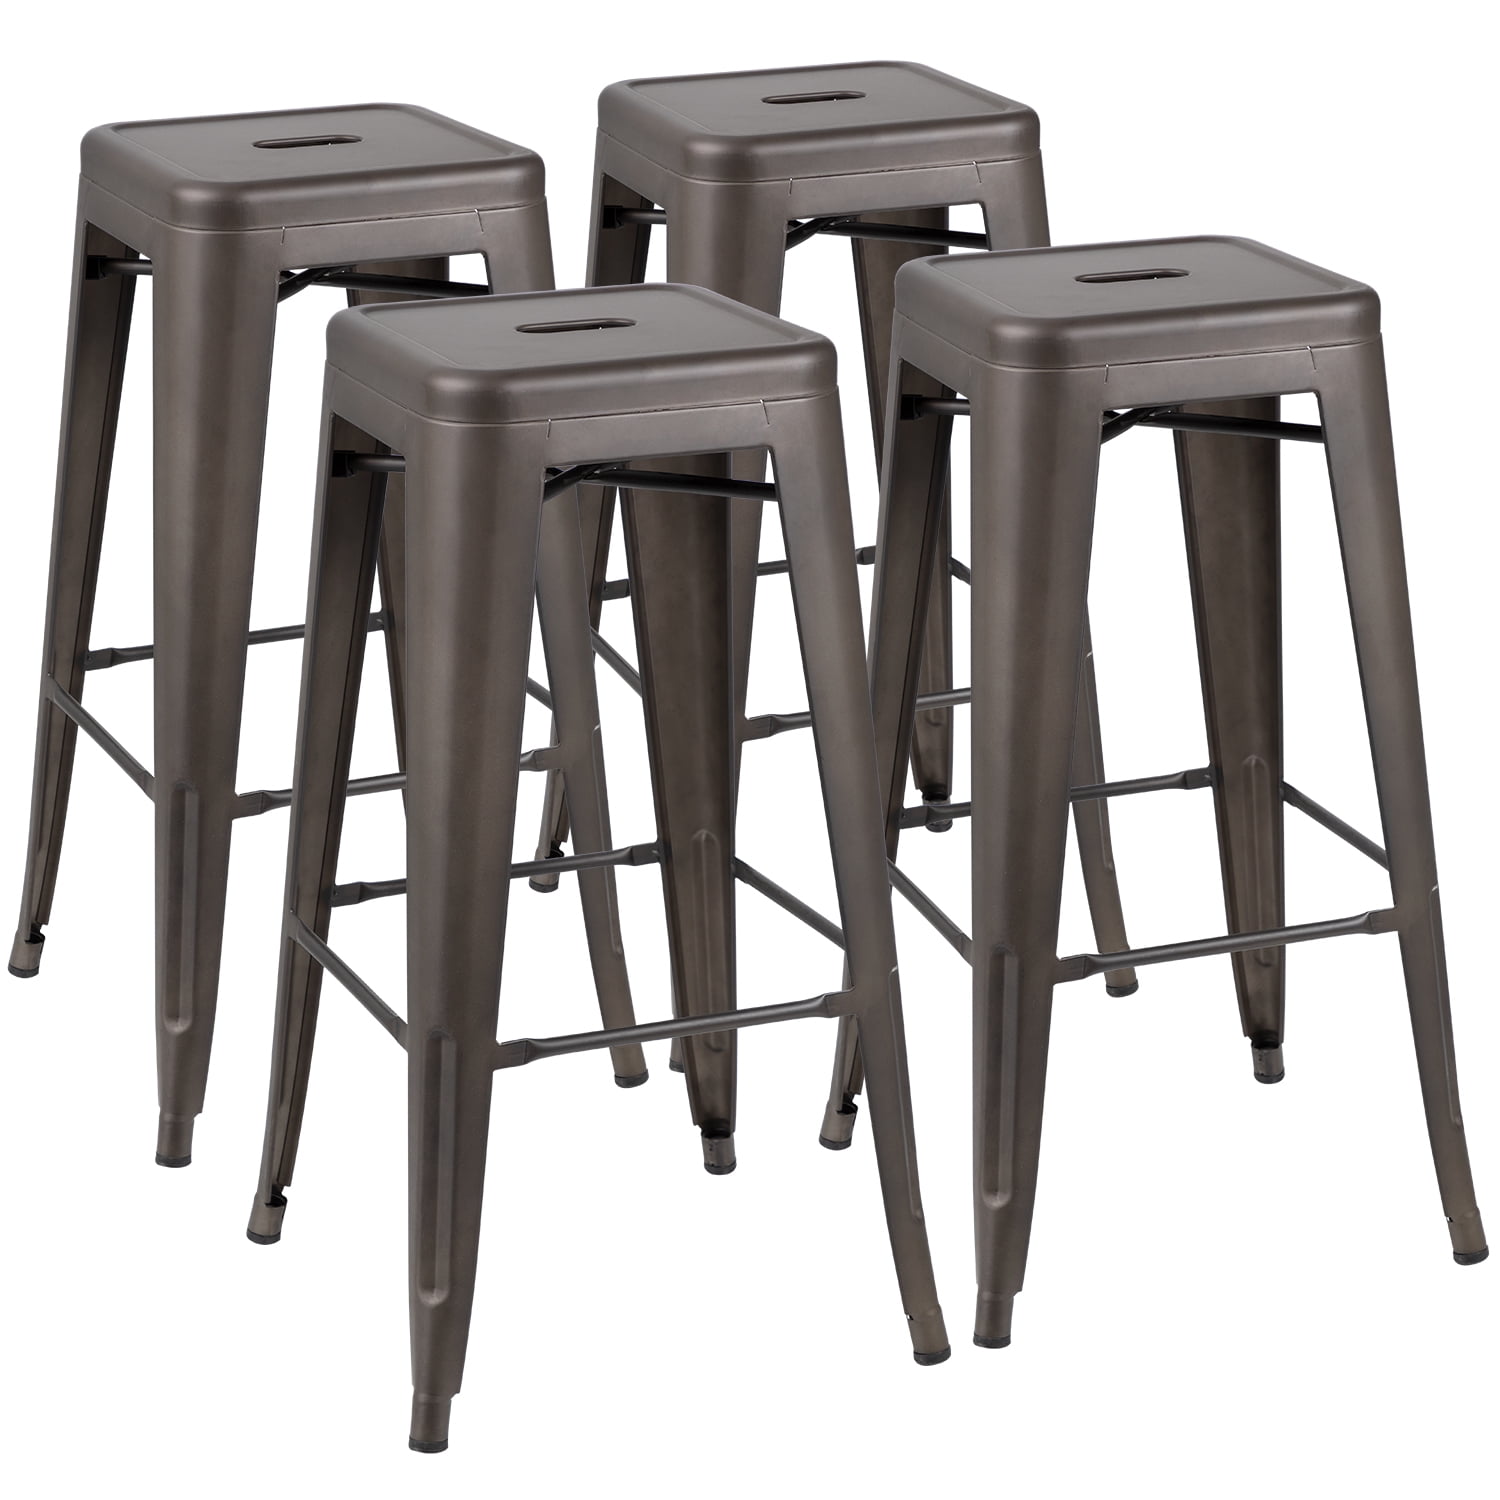 Set of 4 Tolix Style Stackable Industrial Metal 30" Bar Stools 